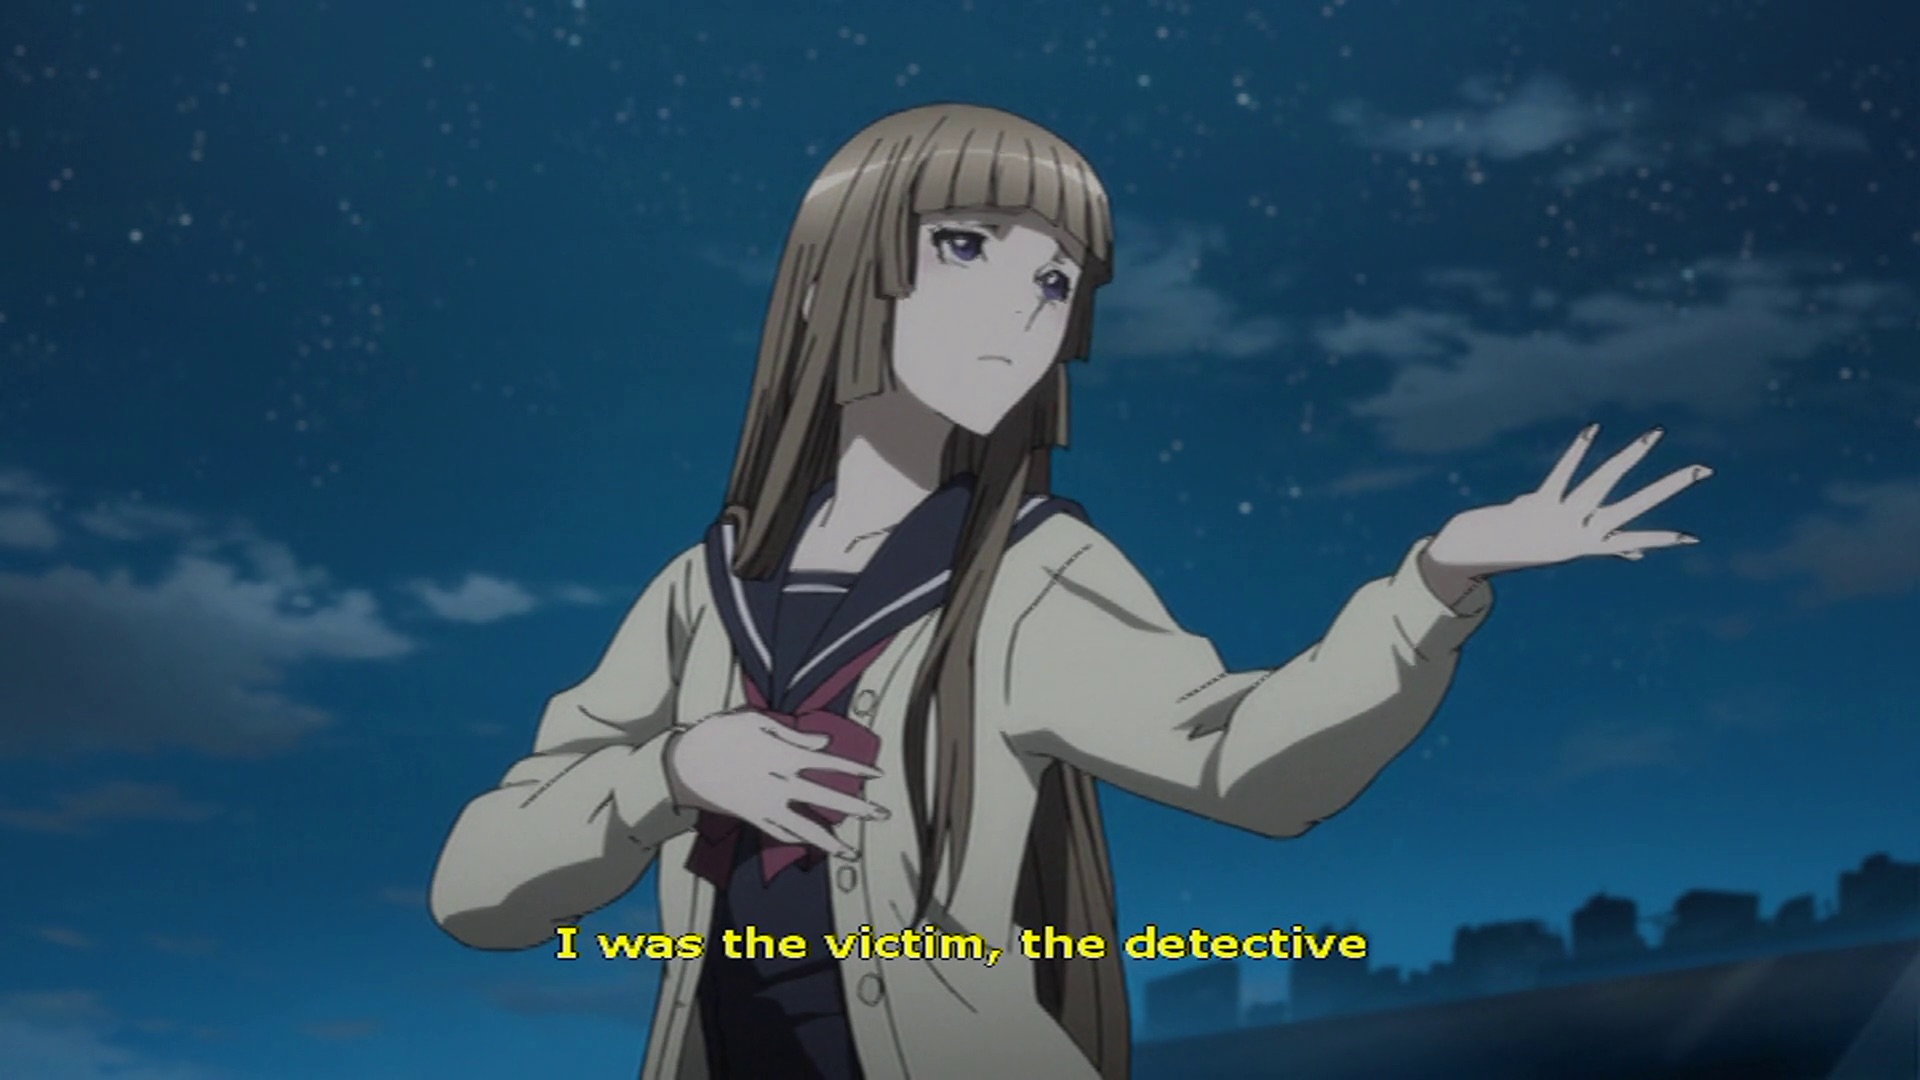 An anime girl says "I was the victim, the detective"